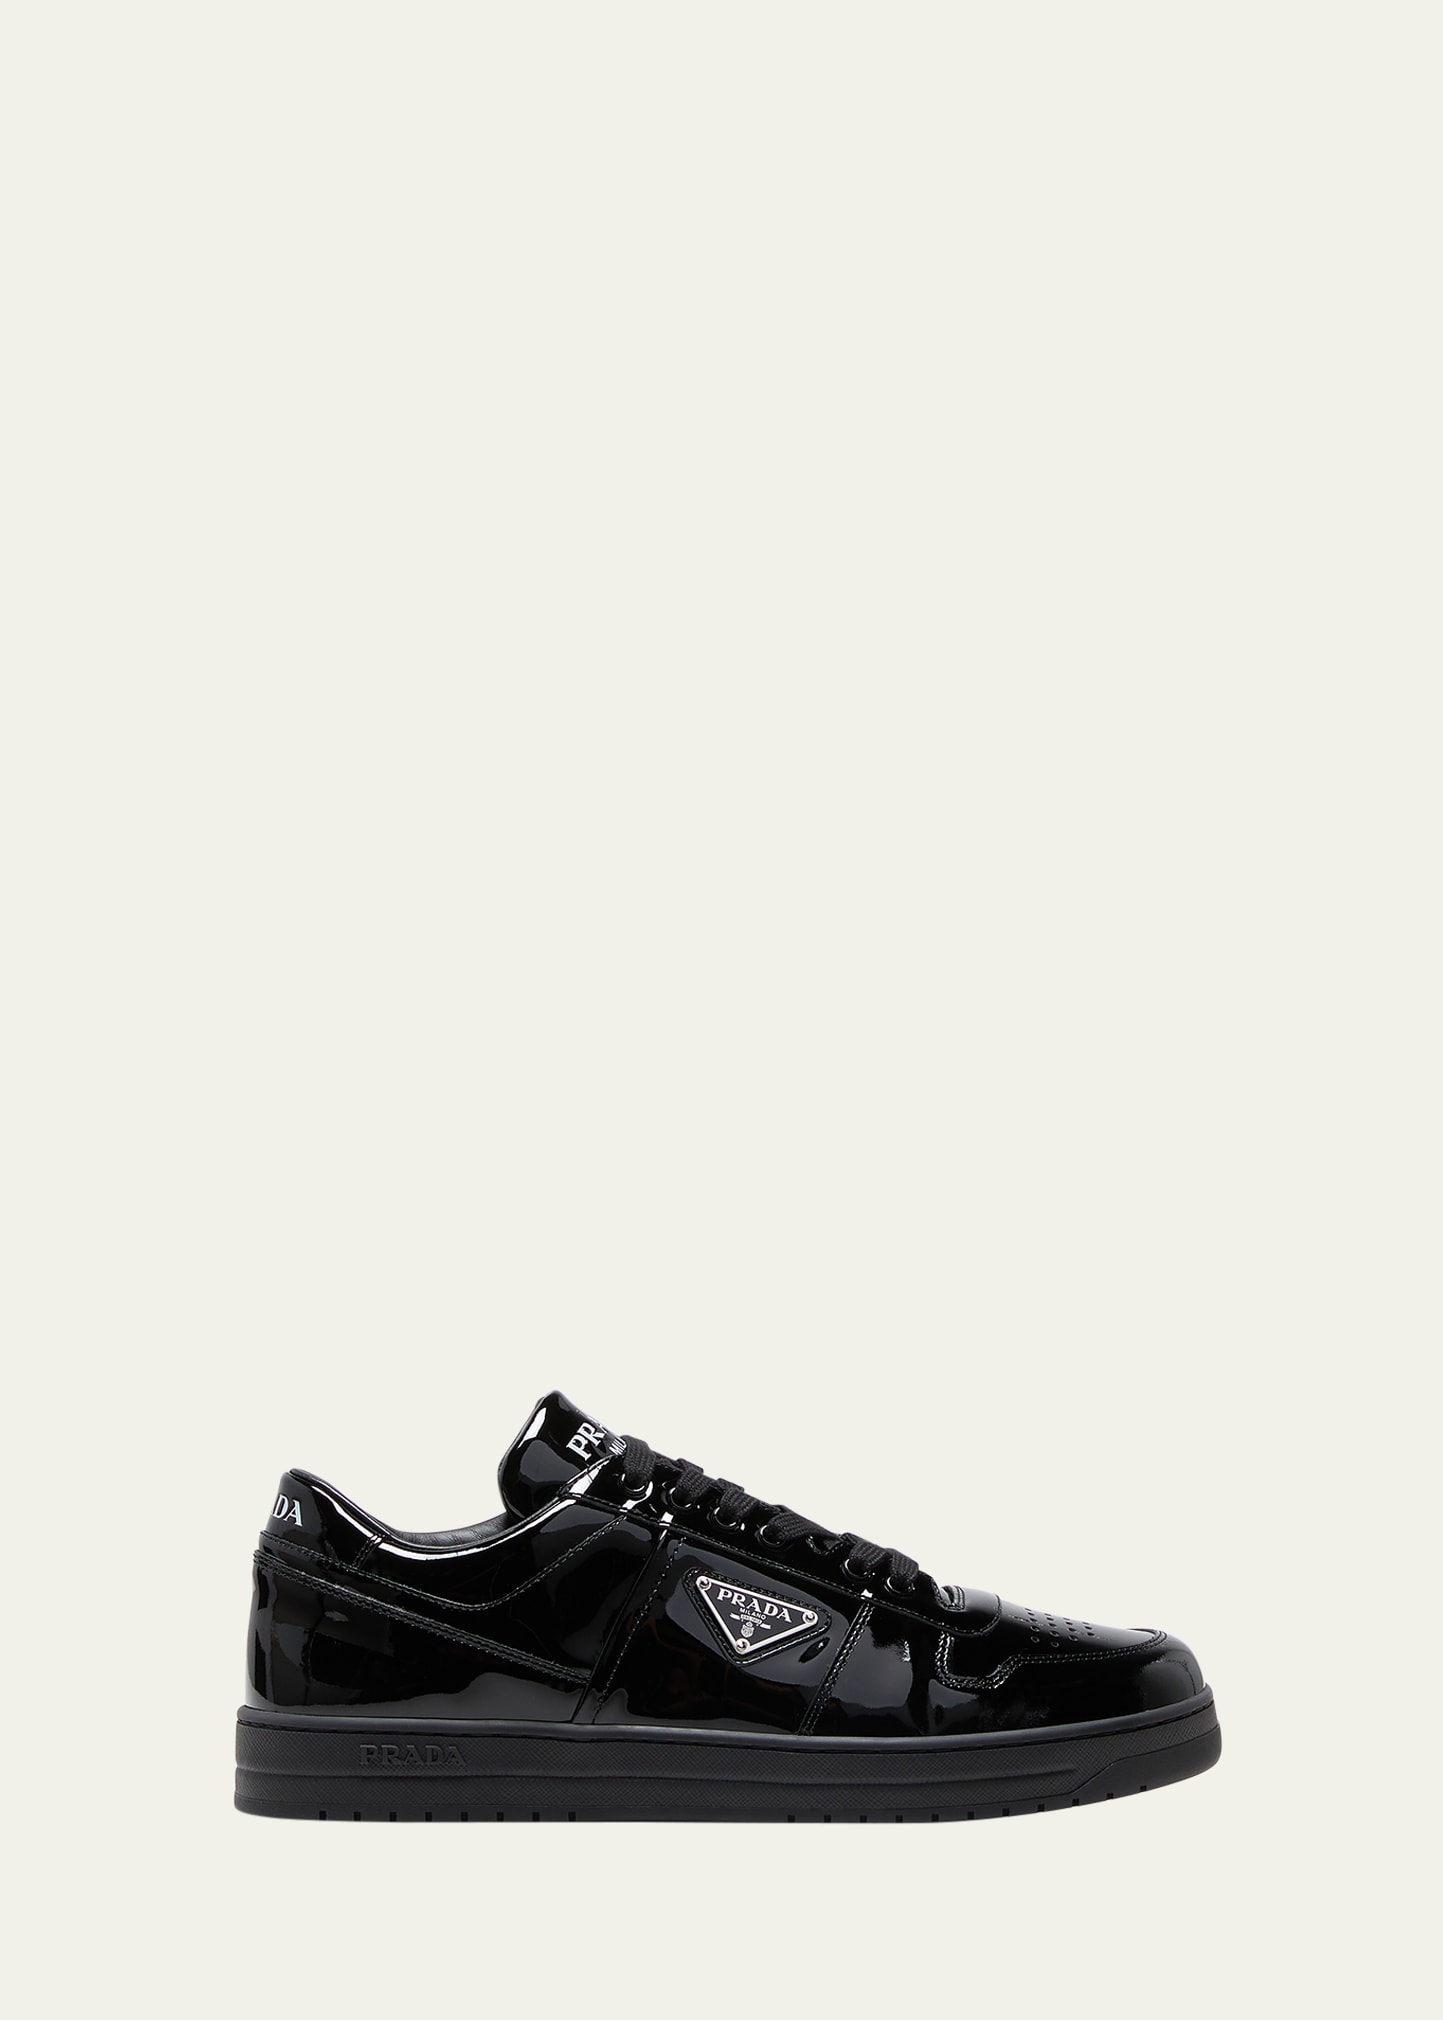 Prada Leather Sneakers With Embellished Inserts And Padded Ankle In Black